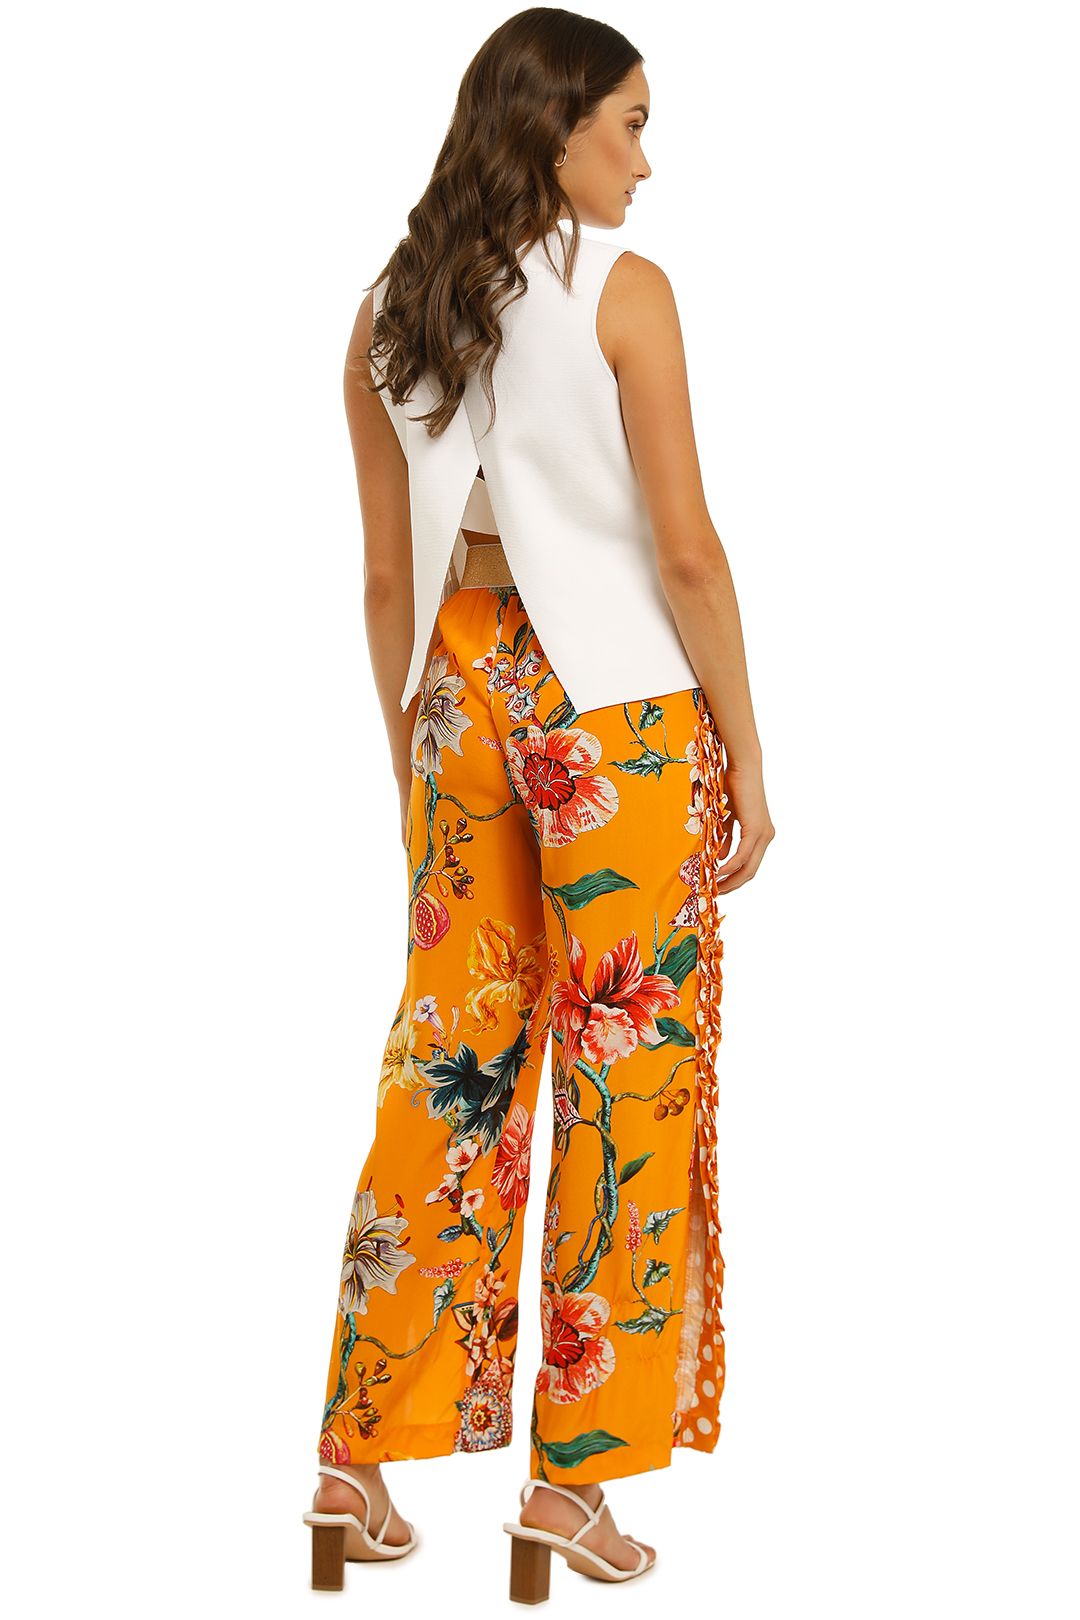 Trelise-Cooper-I'm-In-A-Ruffle-Trouser-Mango-Floral-Back